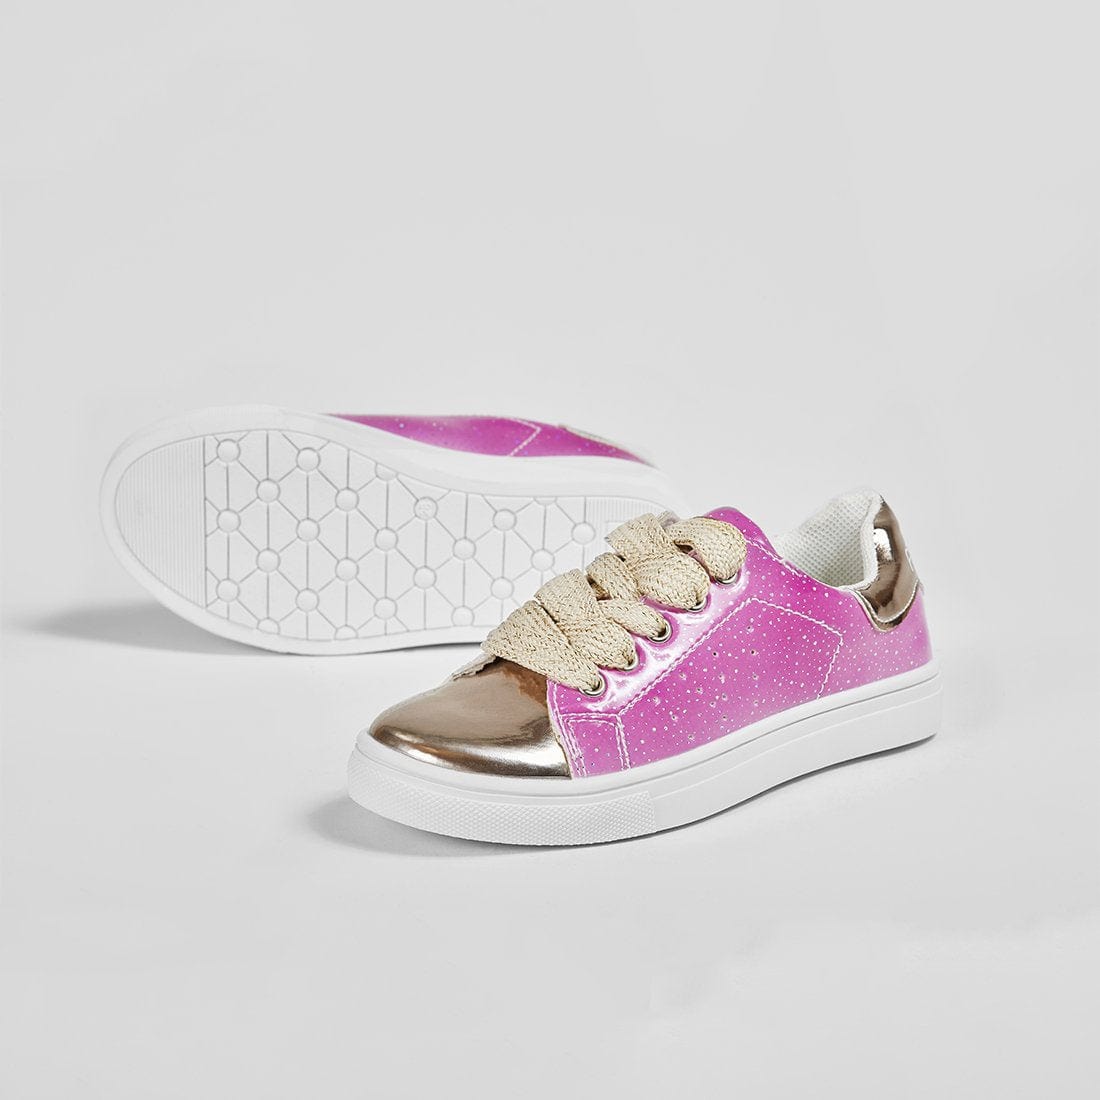 FRESAS CON NATA Shoes Girl's Solar Colour Changing Sneakers